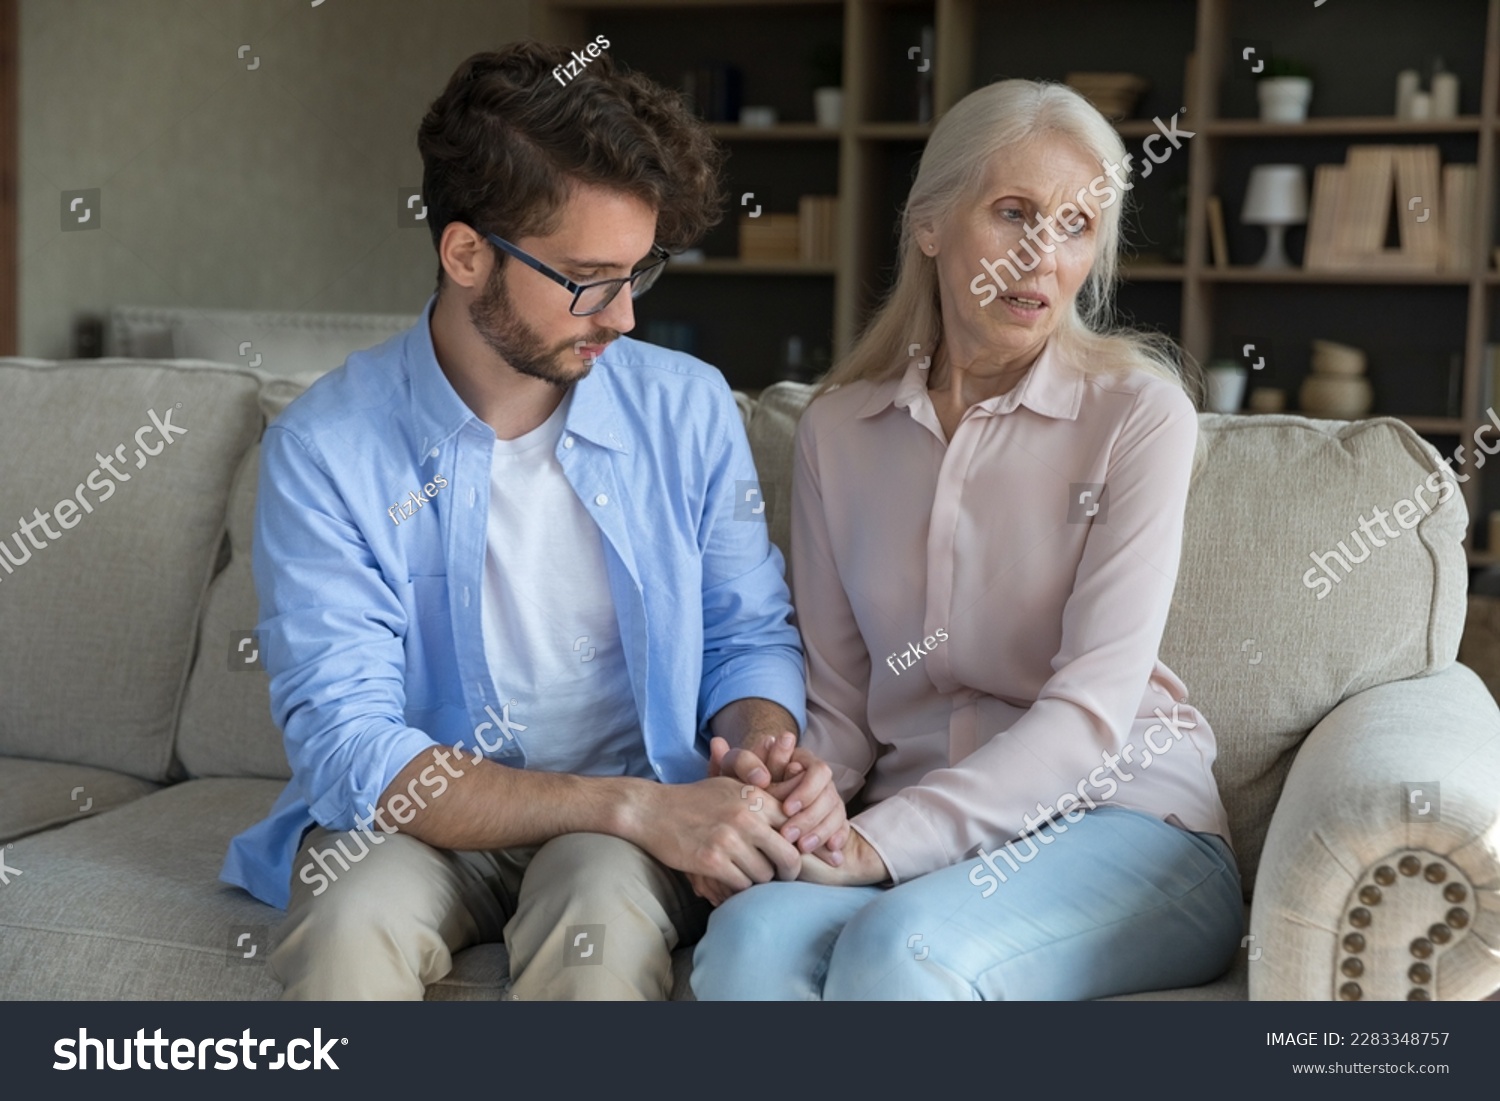 Loving adult son comforting worried concerned senior mother, sitting on couch, holding hand of elder mom, giving support, compassion, empathy, going through crisis, stress, bad news #2283348757